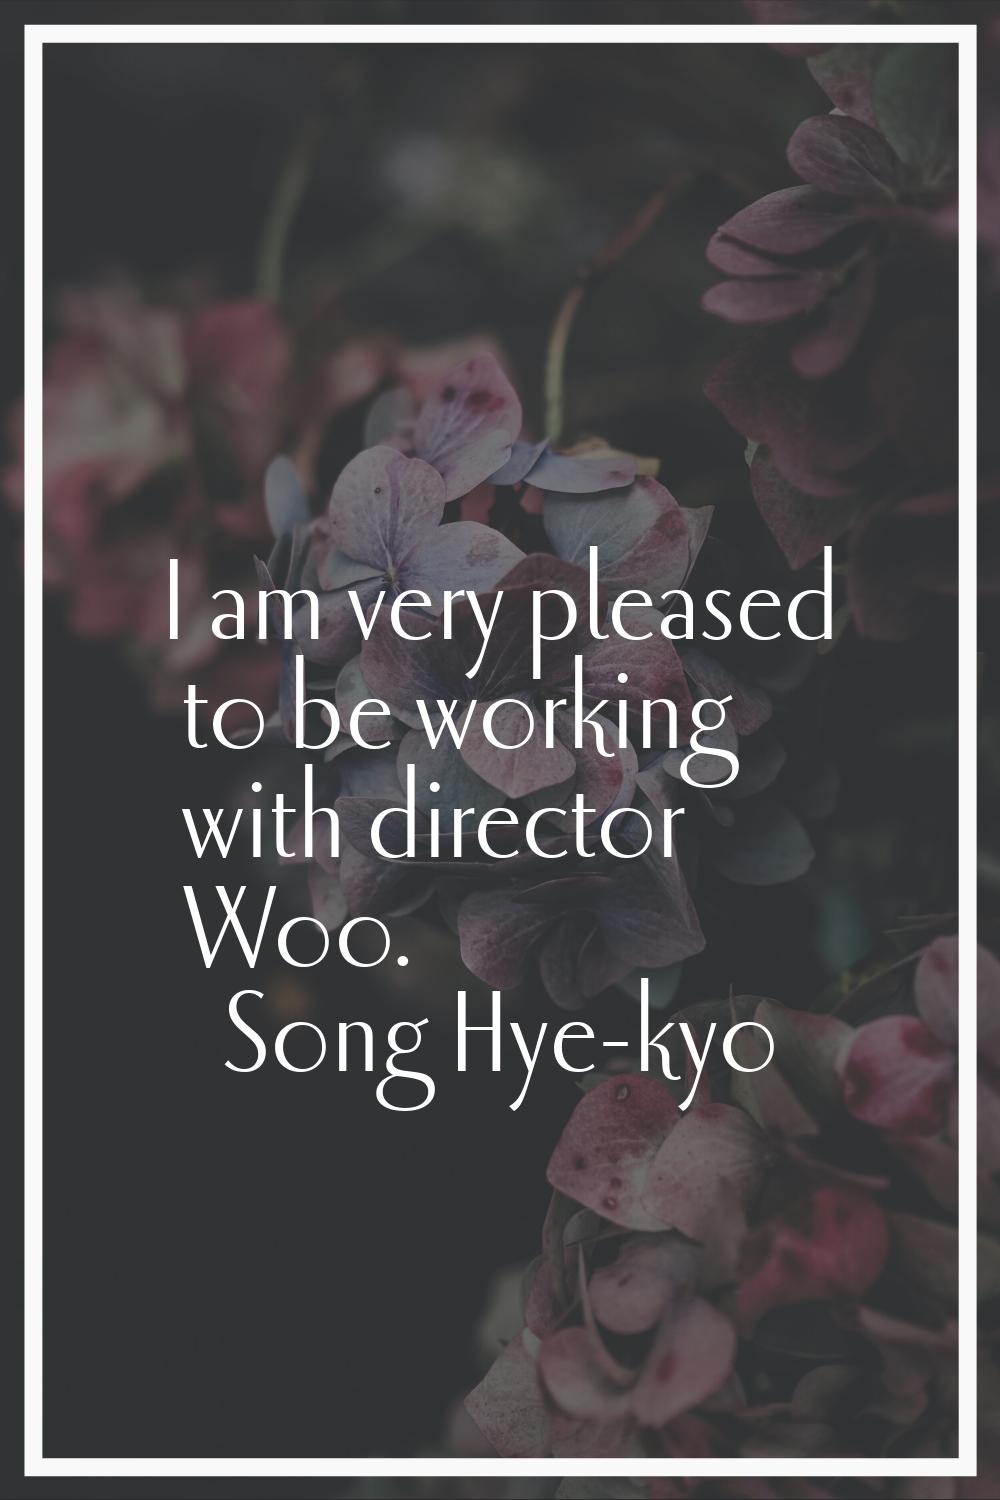 I am very pleased to be working with director Woo.